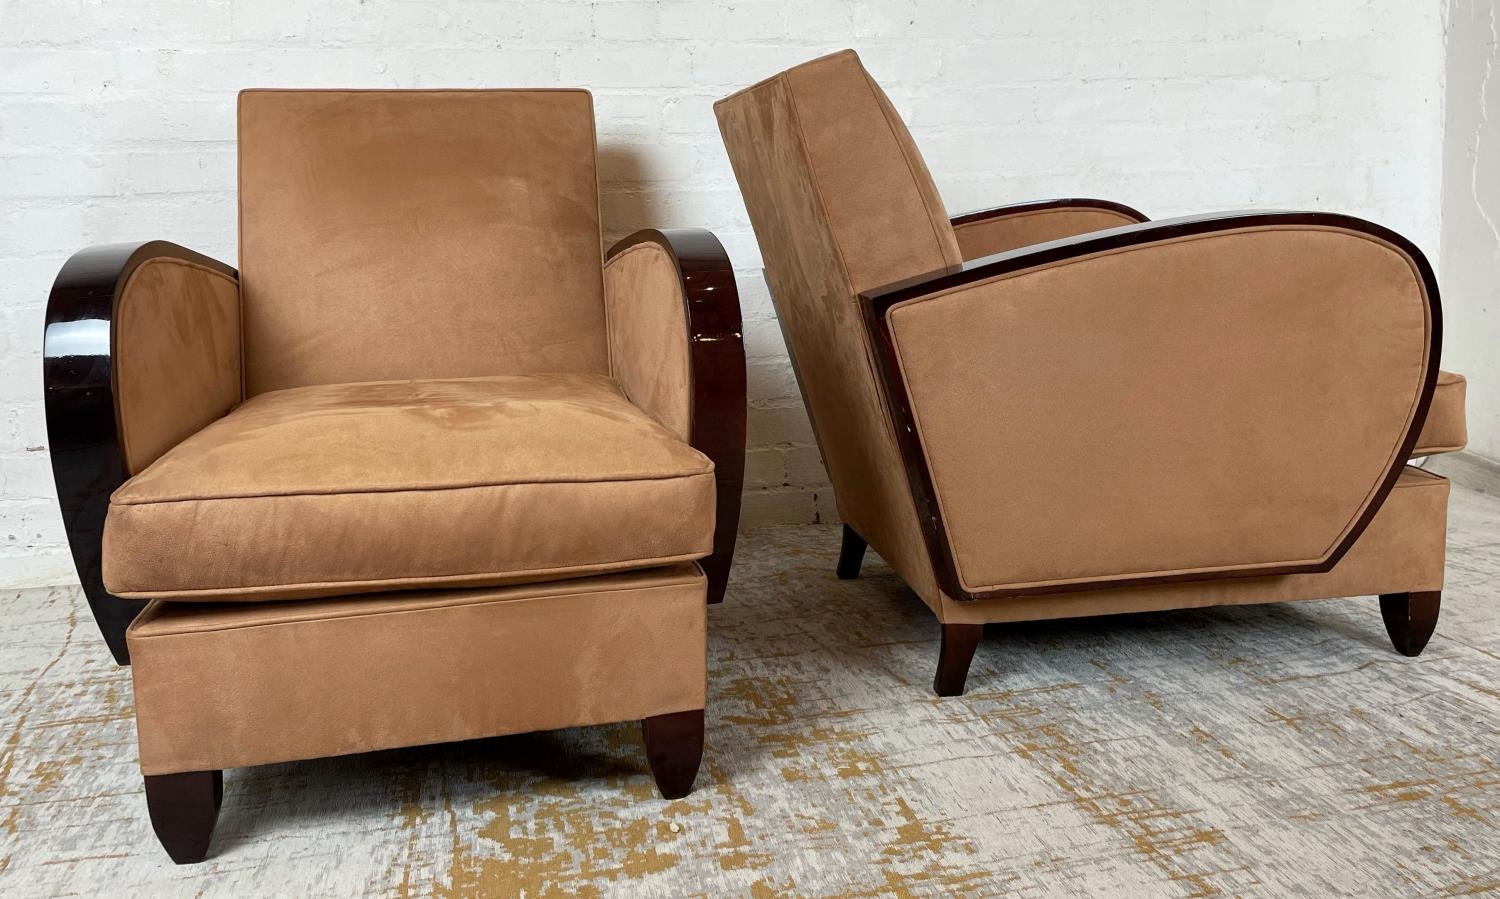 CLUB ARMCHAIRS, a pair, 78cm H x 68cm W x 88cm D, Art Deco style with brown suede upholstery. (2) - Image 3 of 4